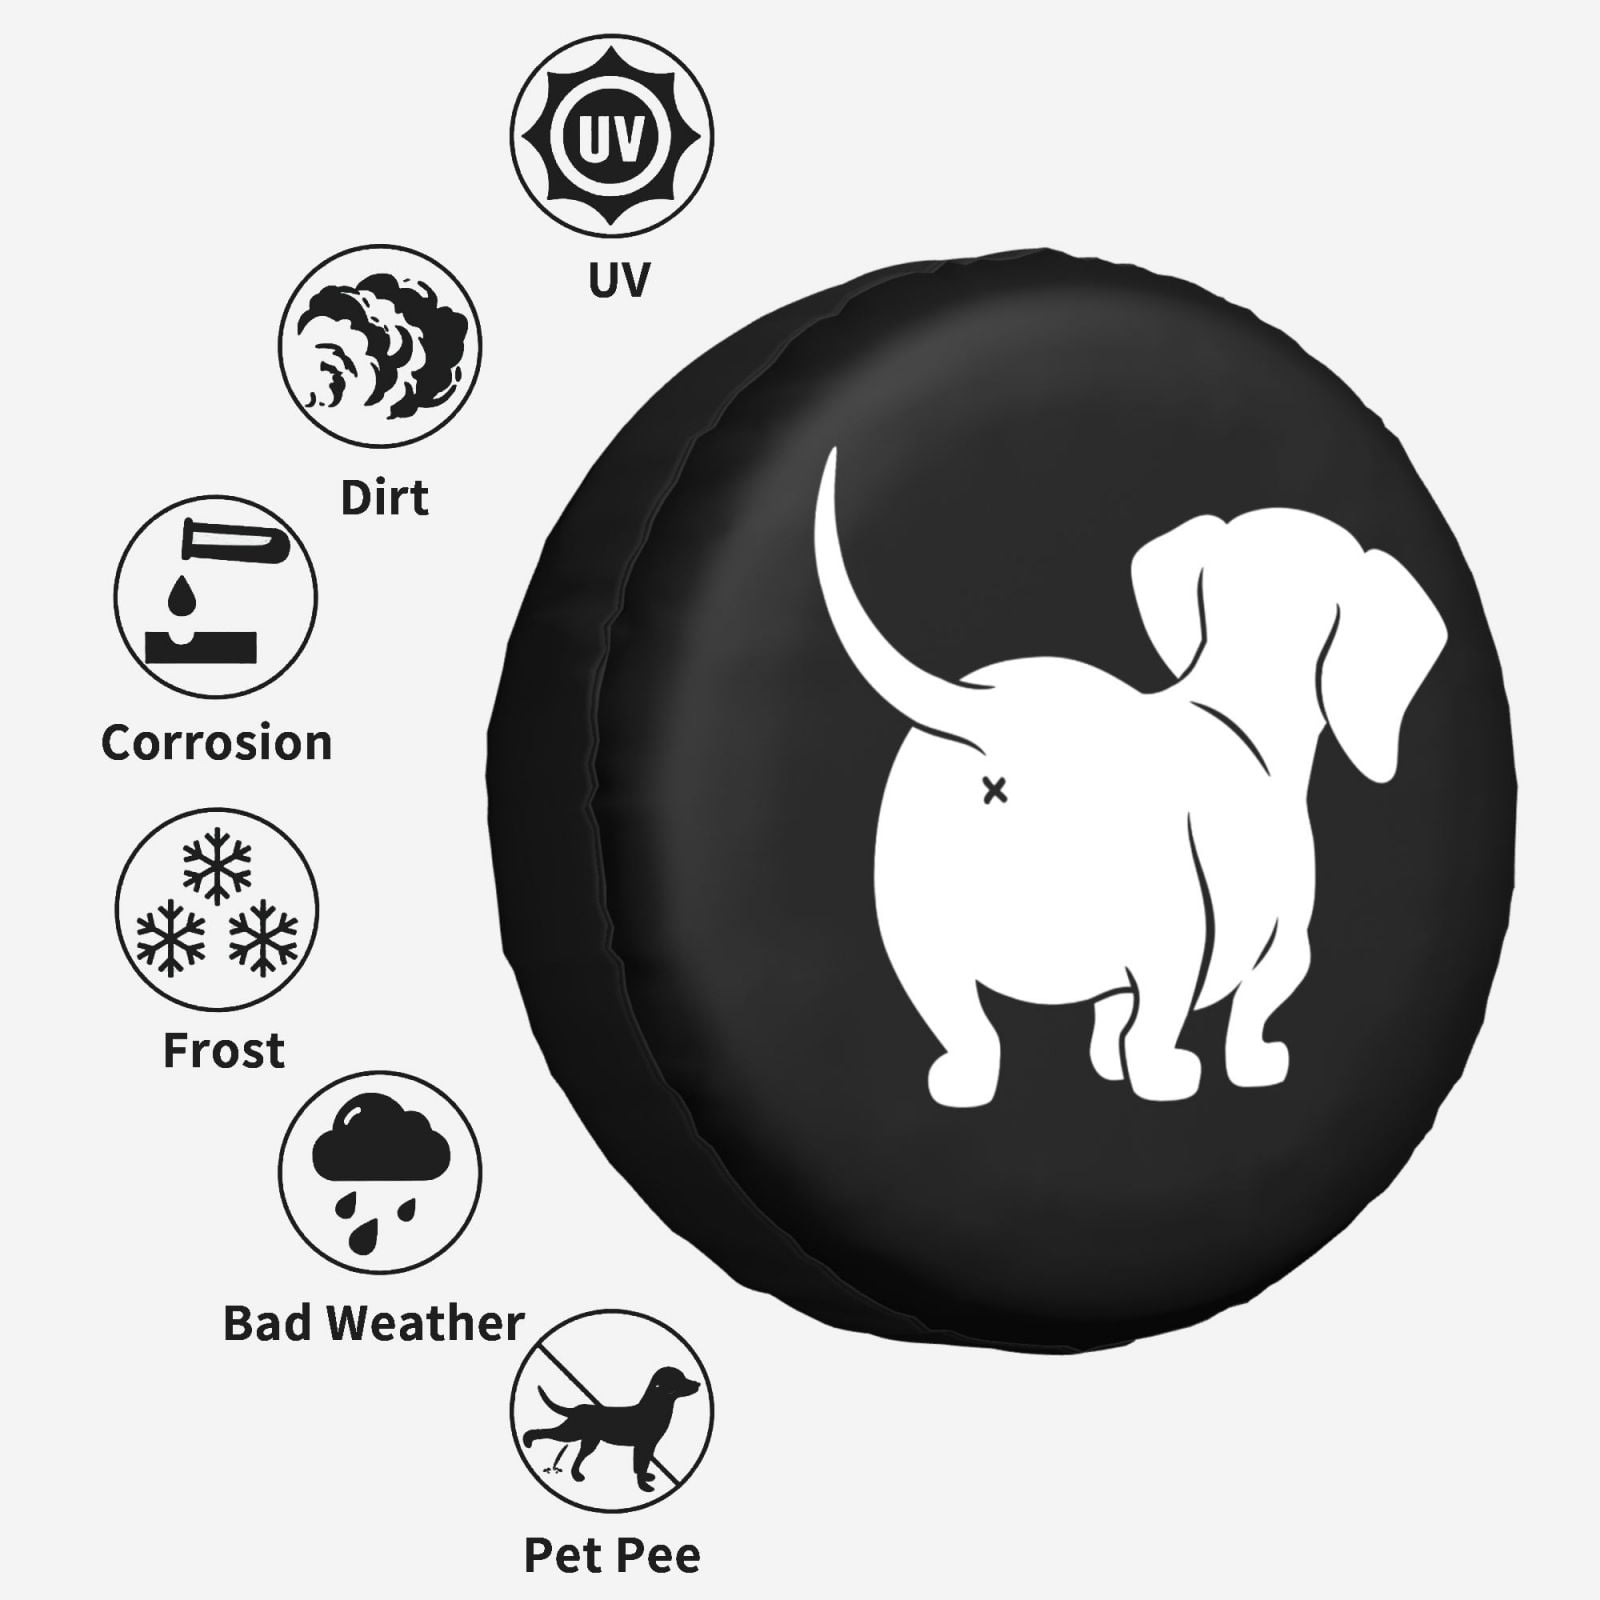 Spare Tire Cover Owl Eyes Printing Universal Spare Wheel Tire Cover Wheel Protectors Covers for Trailer RV SUV Truck Camper Travel Trailer Accessories - 2